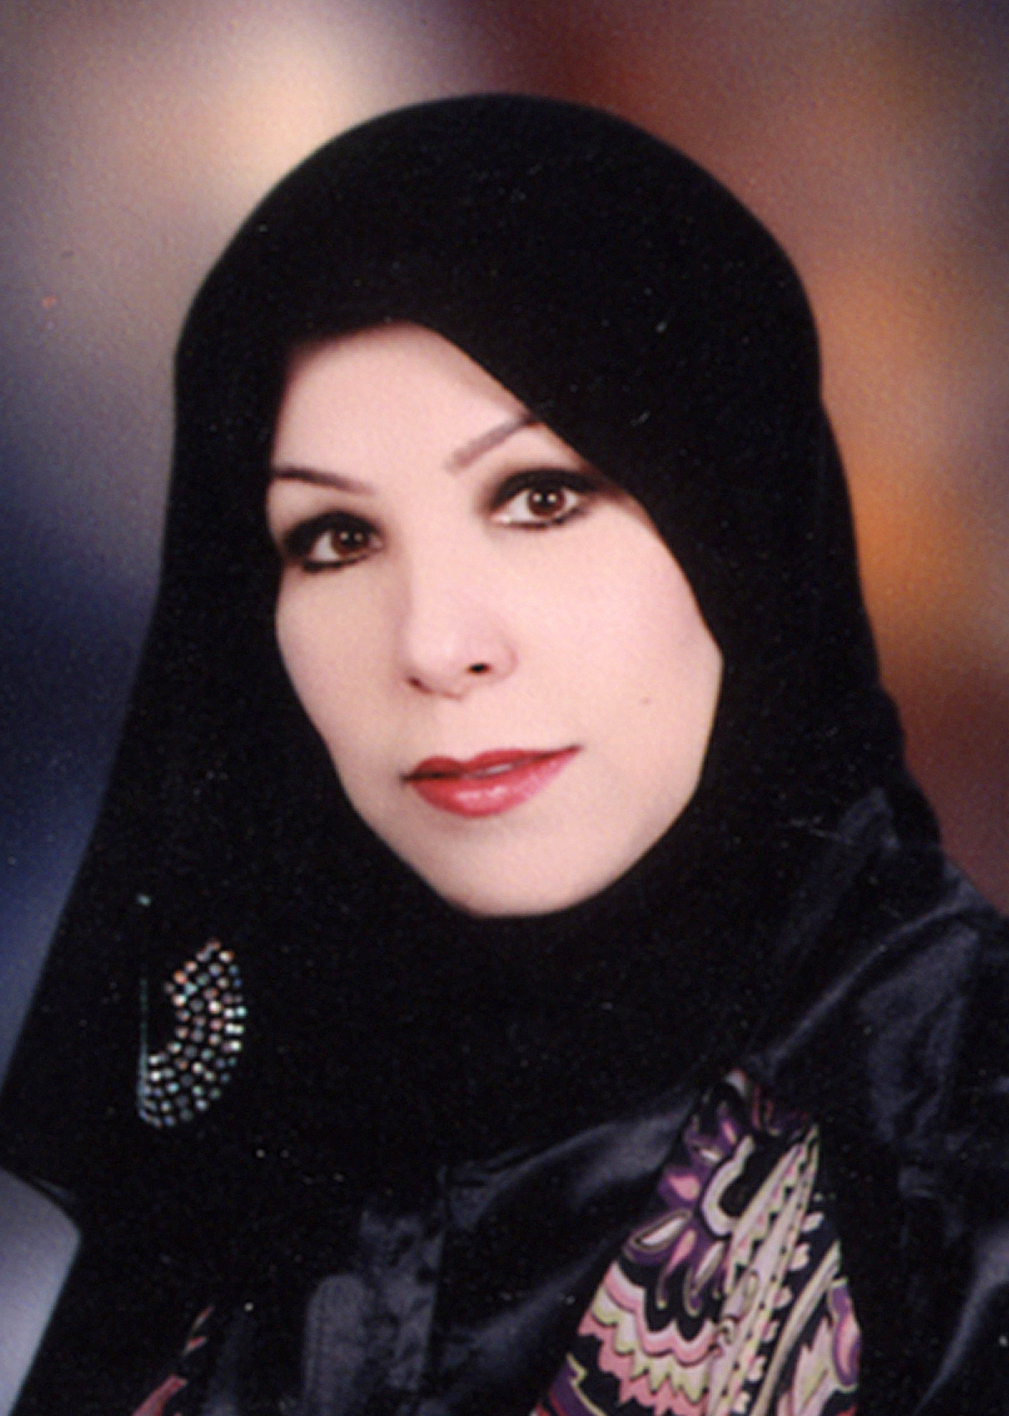 Acting Assistant Undersecretary for Press and Publication in the Ministry of Information Lulua Al-Salem